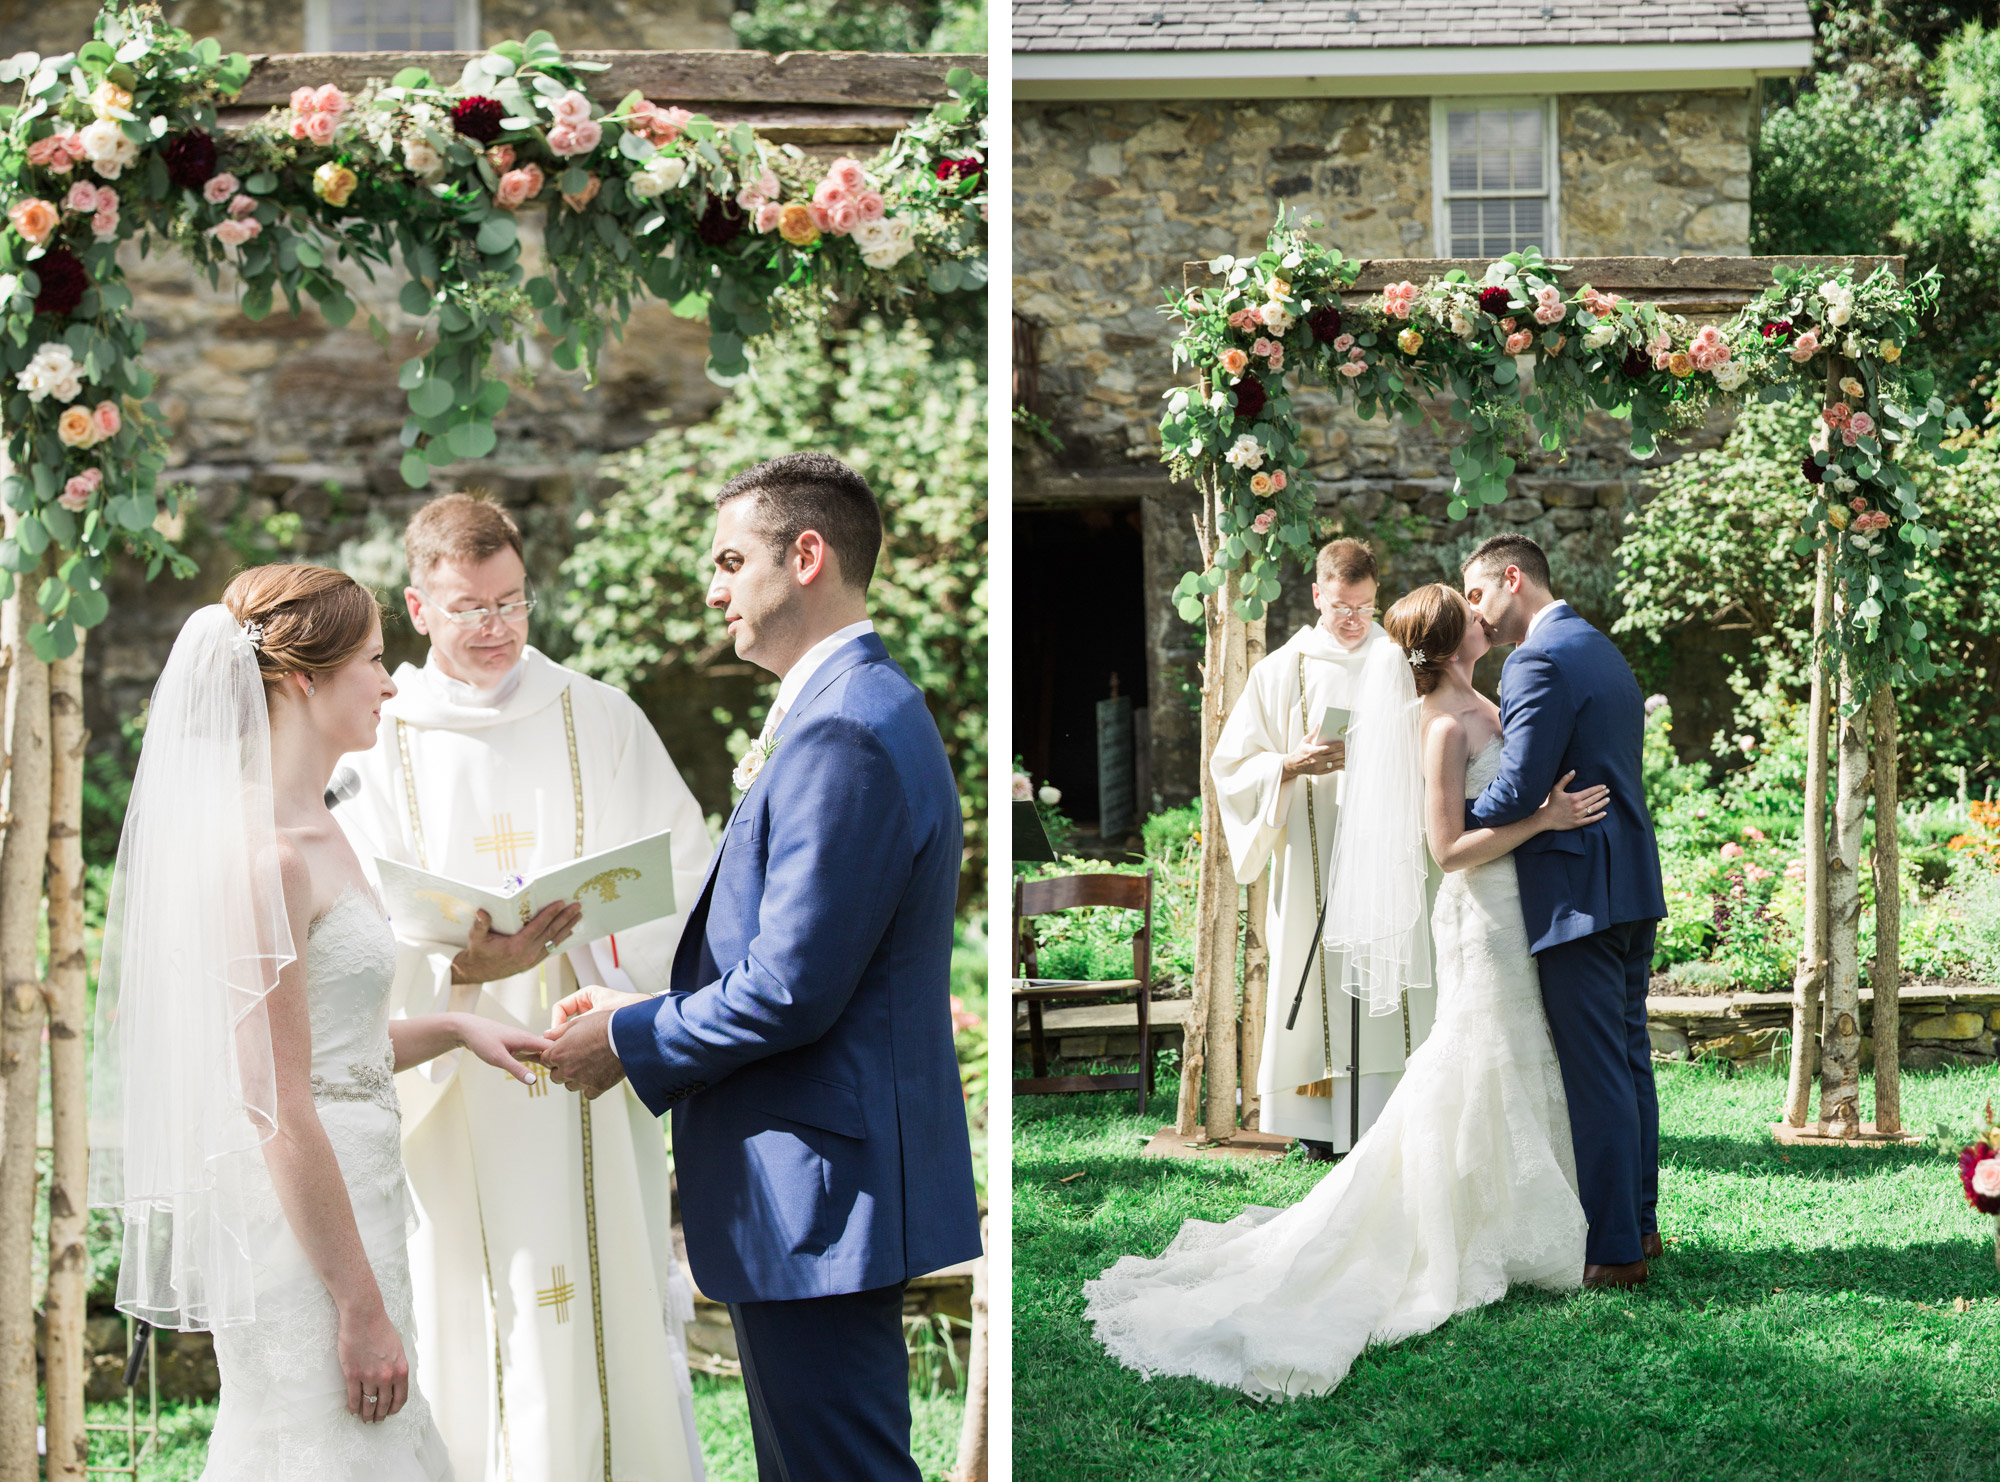 Wedding at Crossed Keys Estate in Andover, New Jersey.